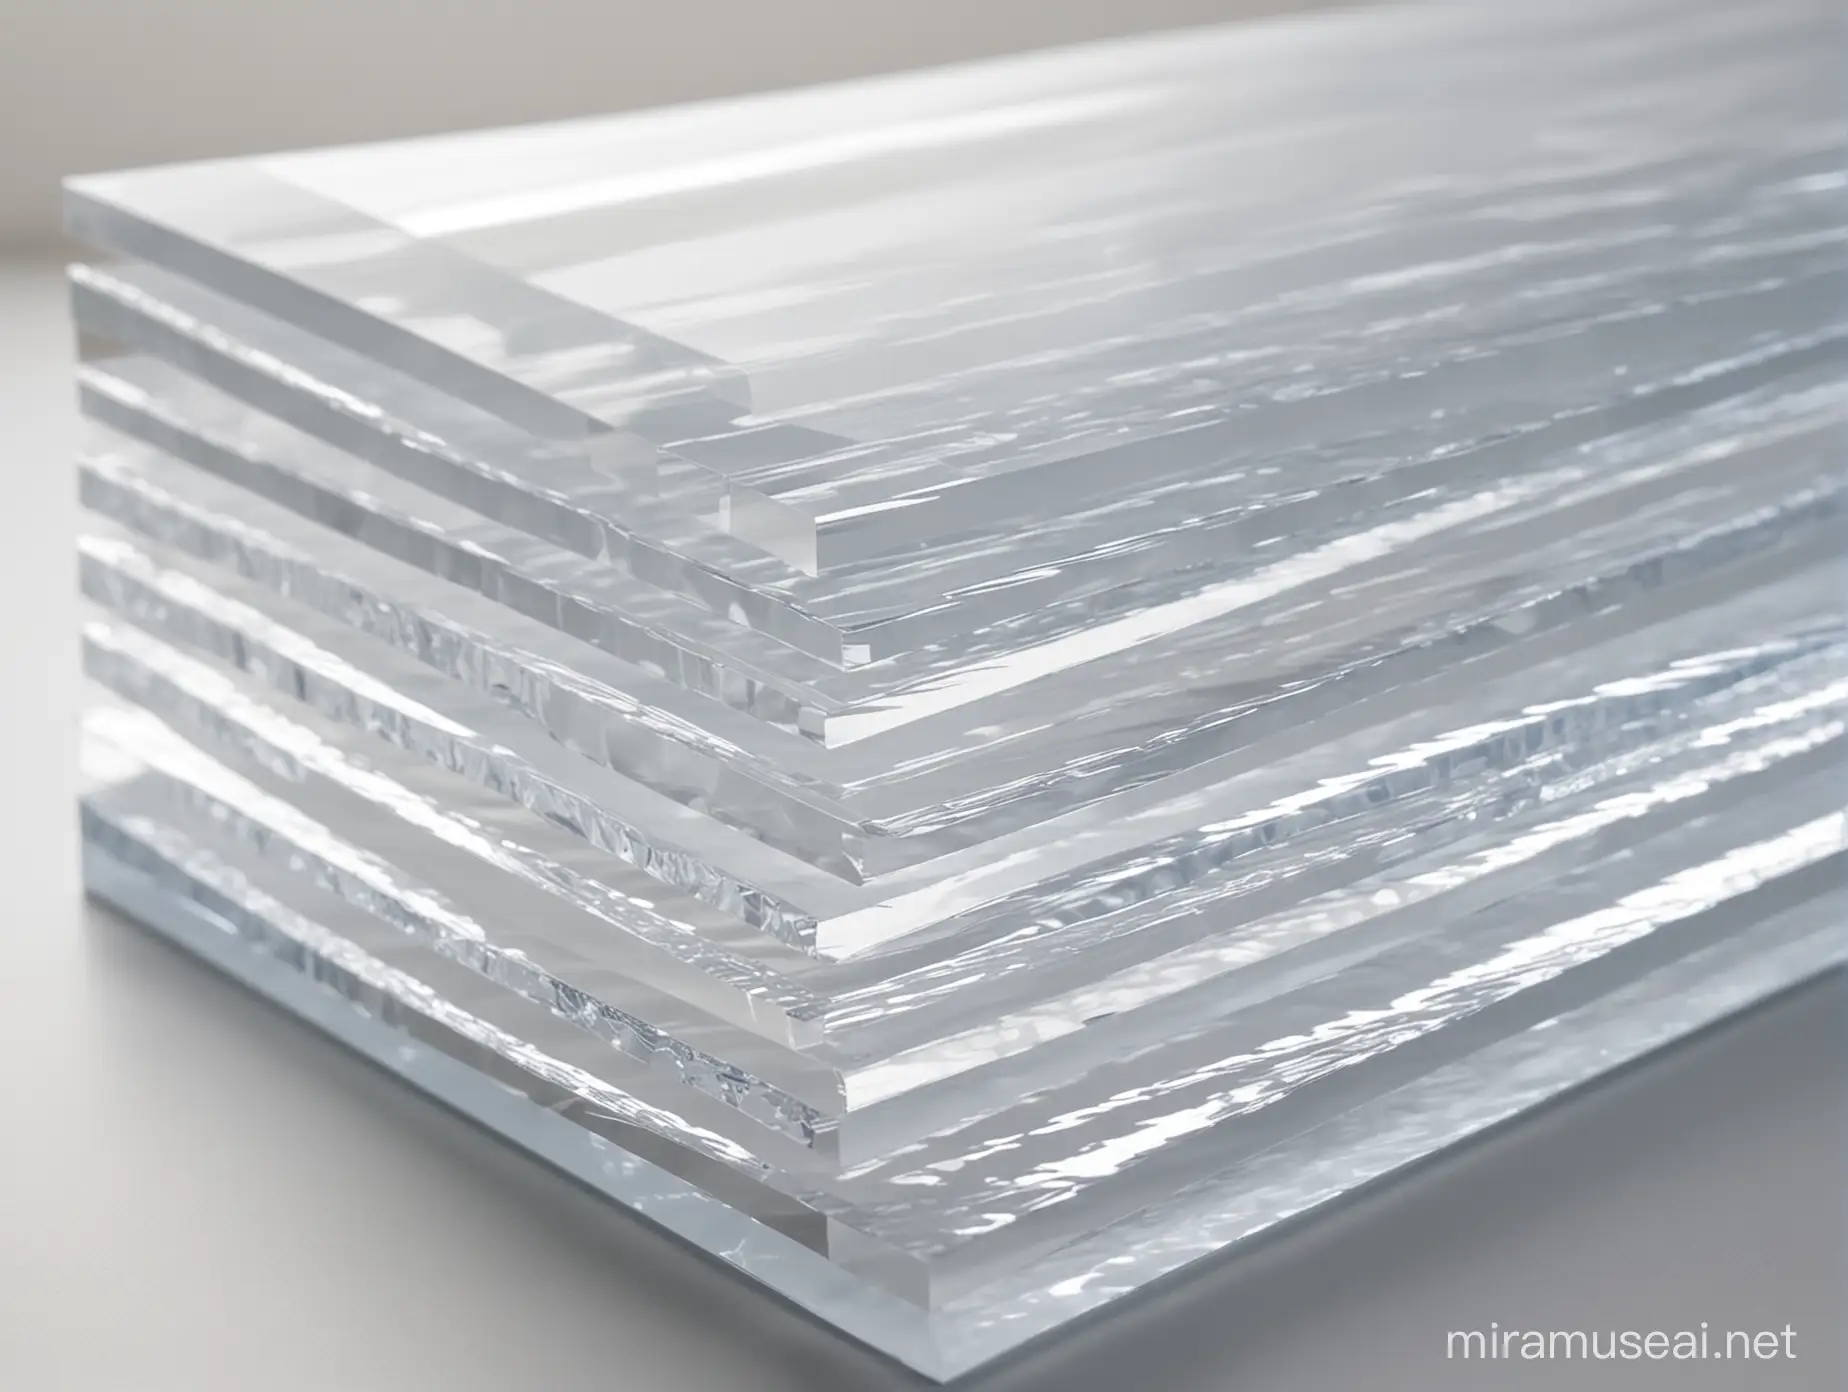 Acrylic sheets, stacked on top of each other in layers, side view, with certain intervals, each acrylic sheet has a different shape.